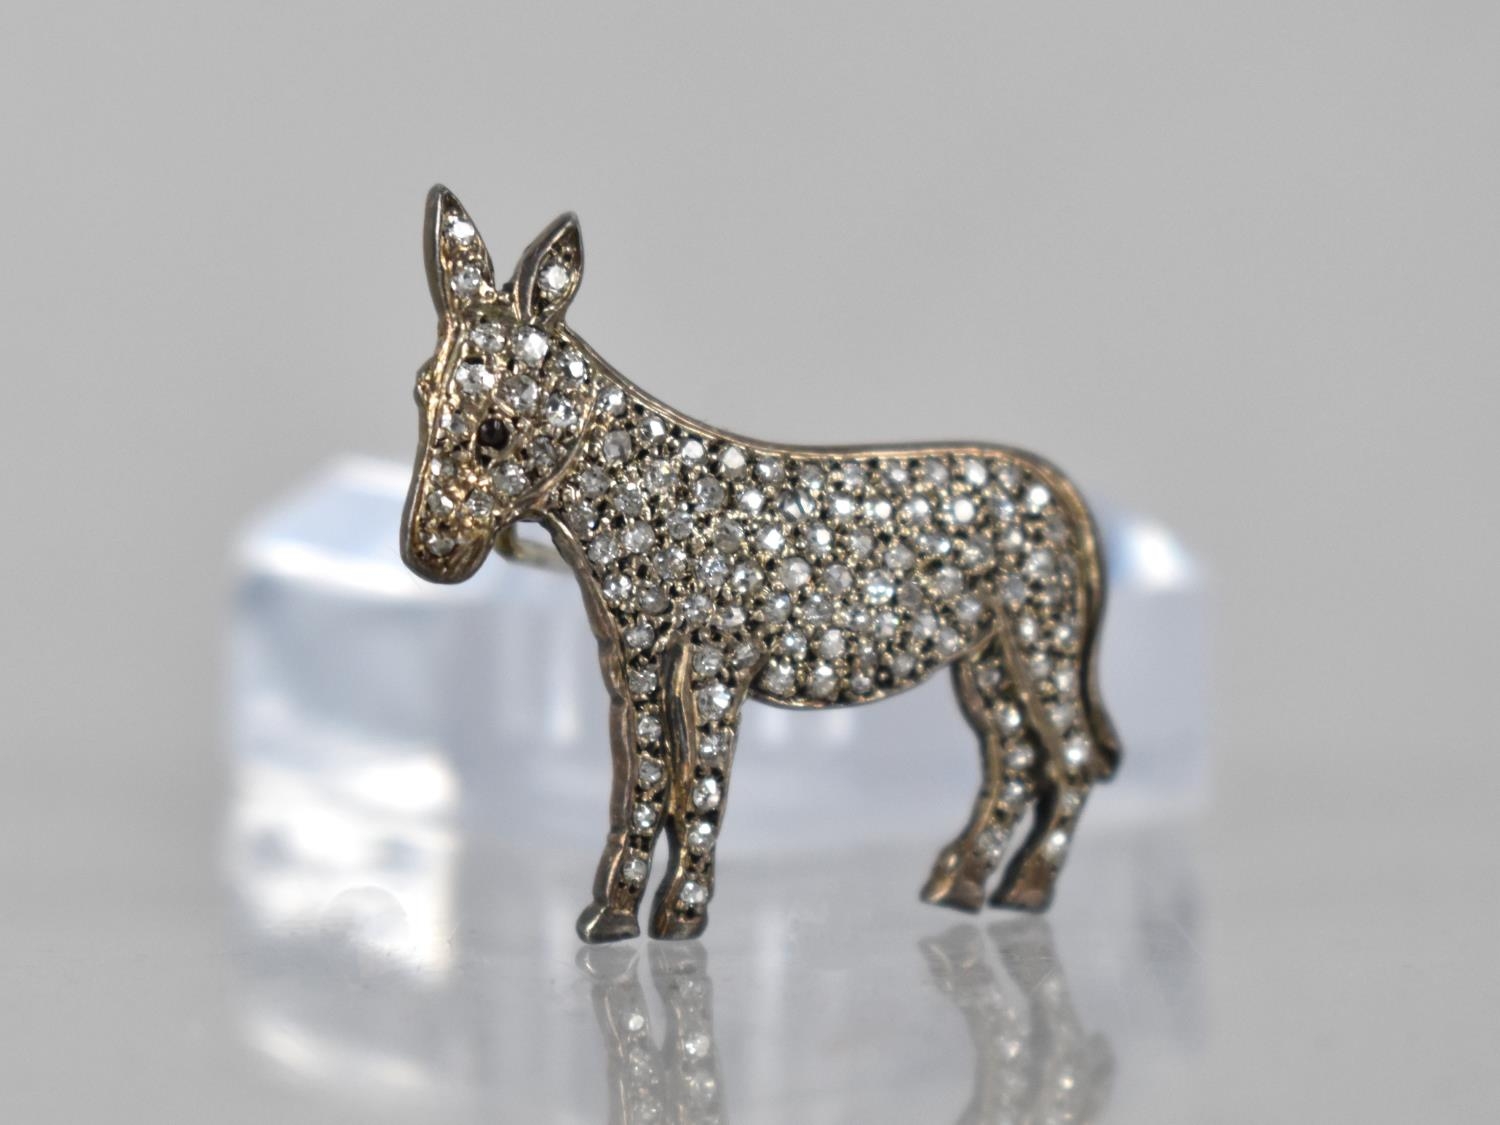 An Early/Mid 20th Century Diamond Encrusted Brooch, Donkey, Mixed Cut Stones incorporating Rose Cut, - Image 2 of 4